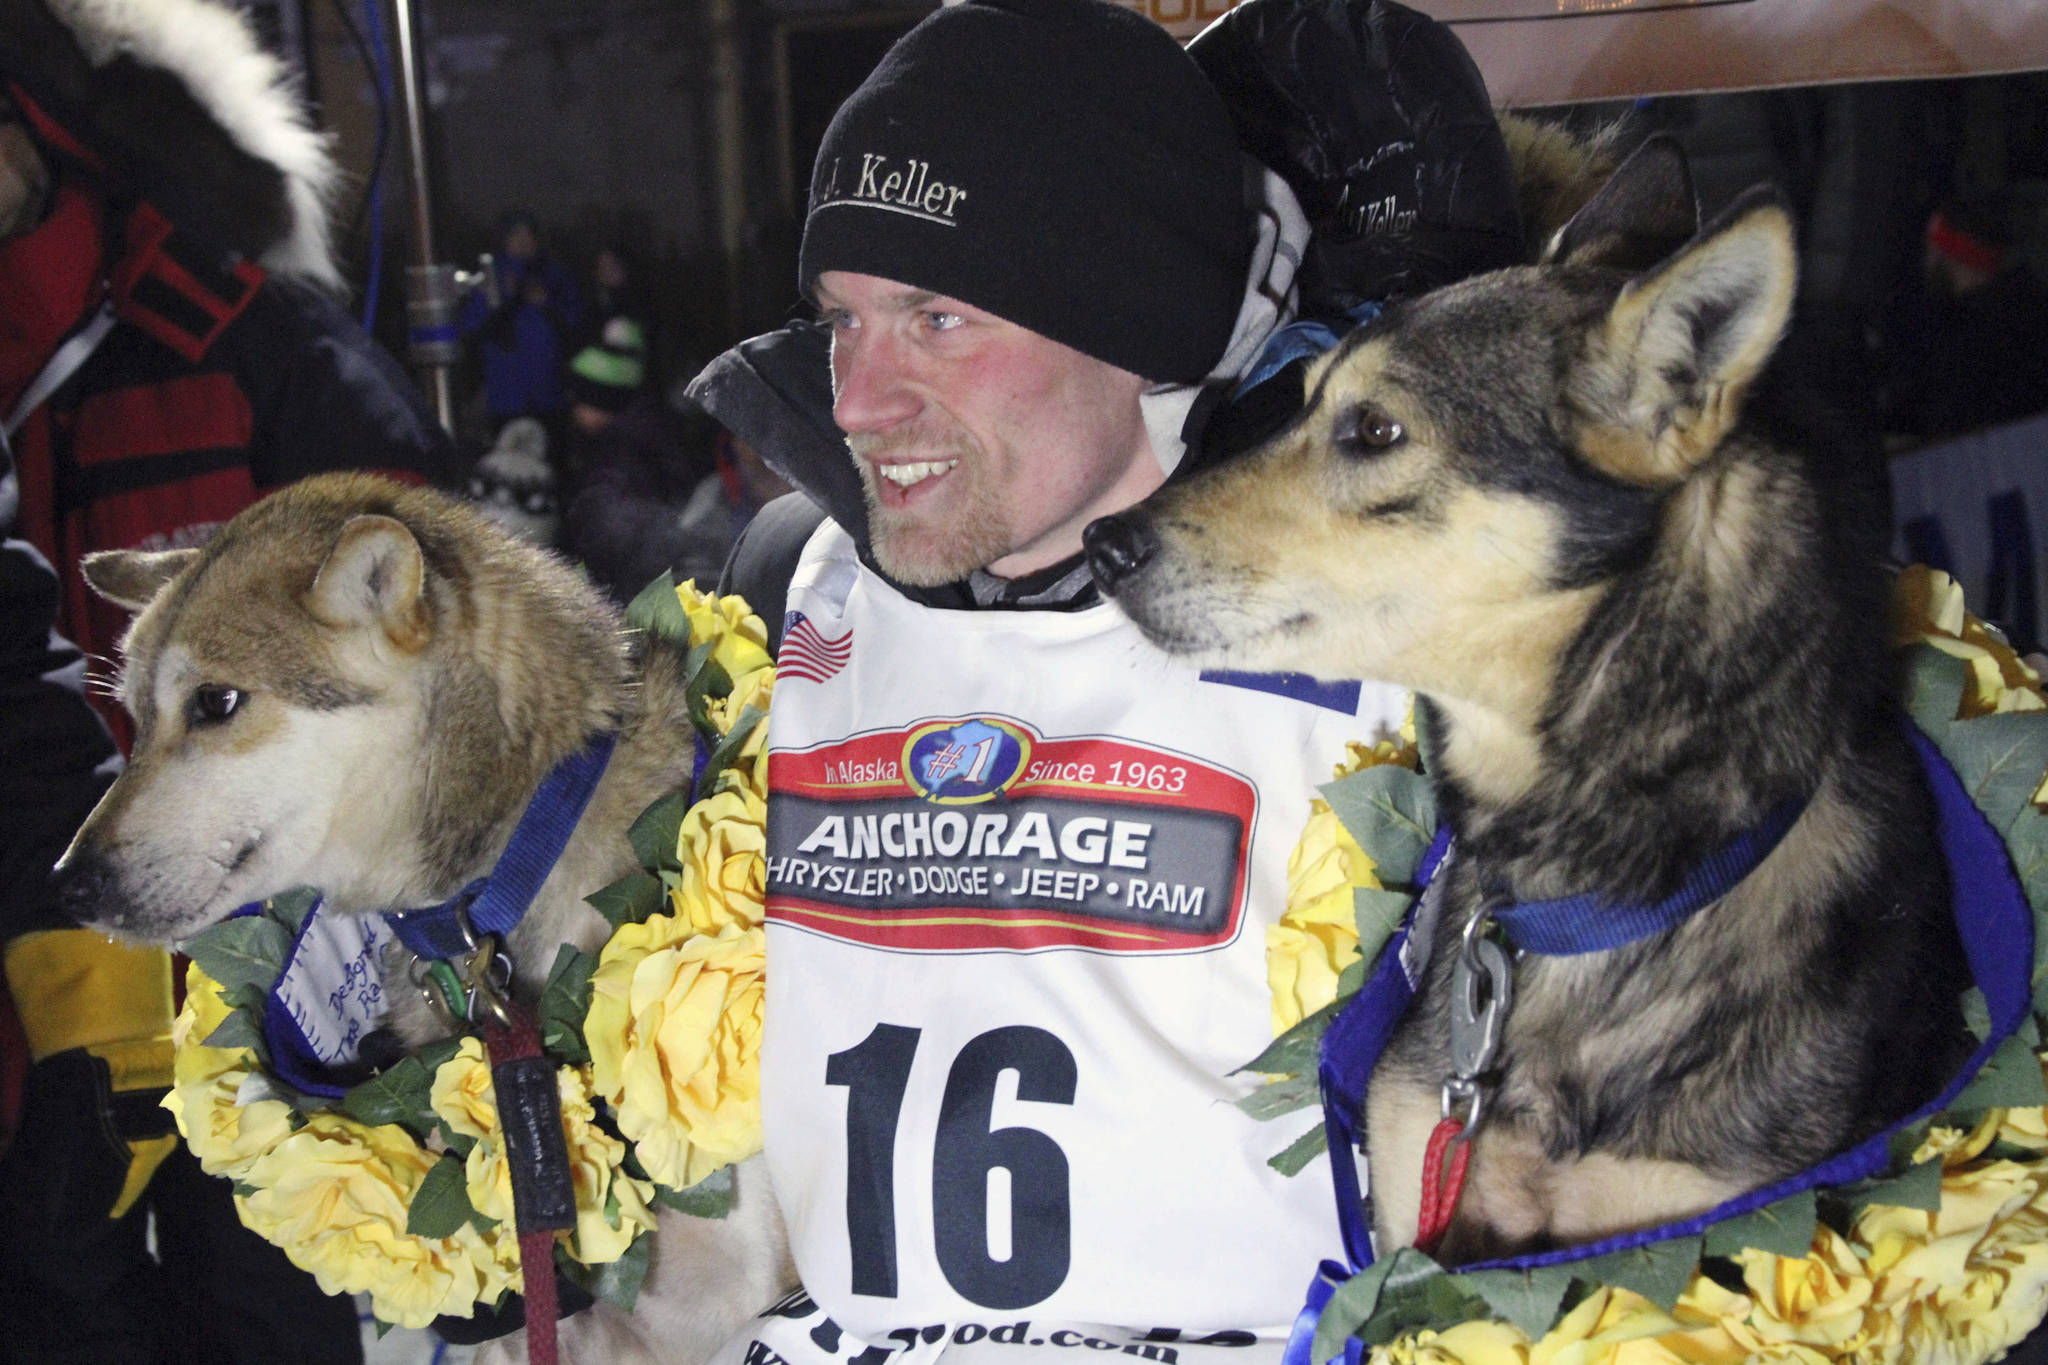 In this March 15, 2016 photo, Dallas Seavey poses with his lead dogs Reef, left, and Tide after finishing the Iditarod Trail Sled Dog Race in Nome. Seavey won his third straight Iditarod, for his fourth overall title in the last five years. Four-time Iditarod champion Dallas Seavey denies he administered banned drugs to his dogs in this year’s race, and has withdrawn from the 2018 race in protest. The Iditarod Trail Committee on Monday identified Seavey as the musher who had four dogs test positive for a banned opioid pain reliever after finishing the race last March in Nome. (Mark Thiessen | The Associated Press File)